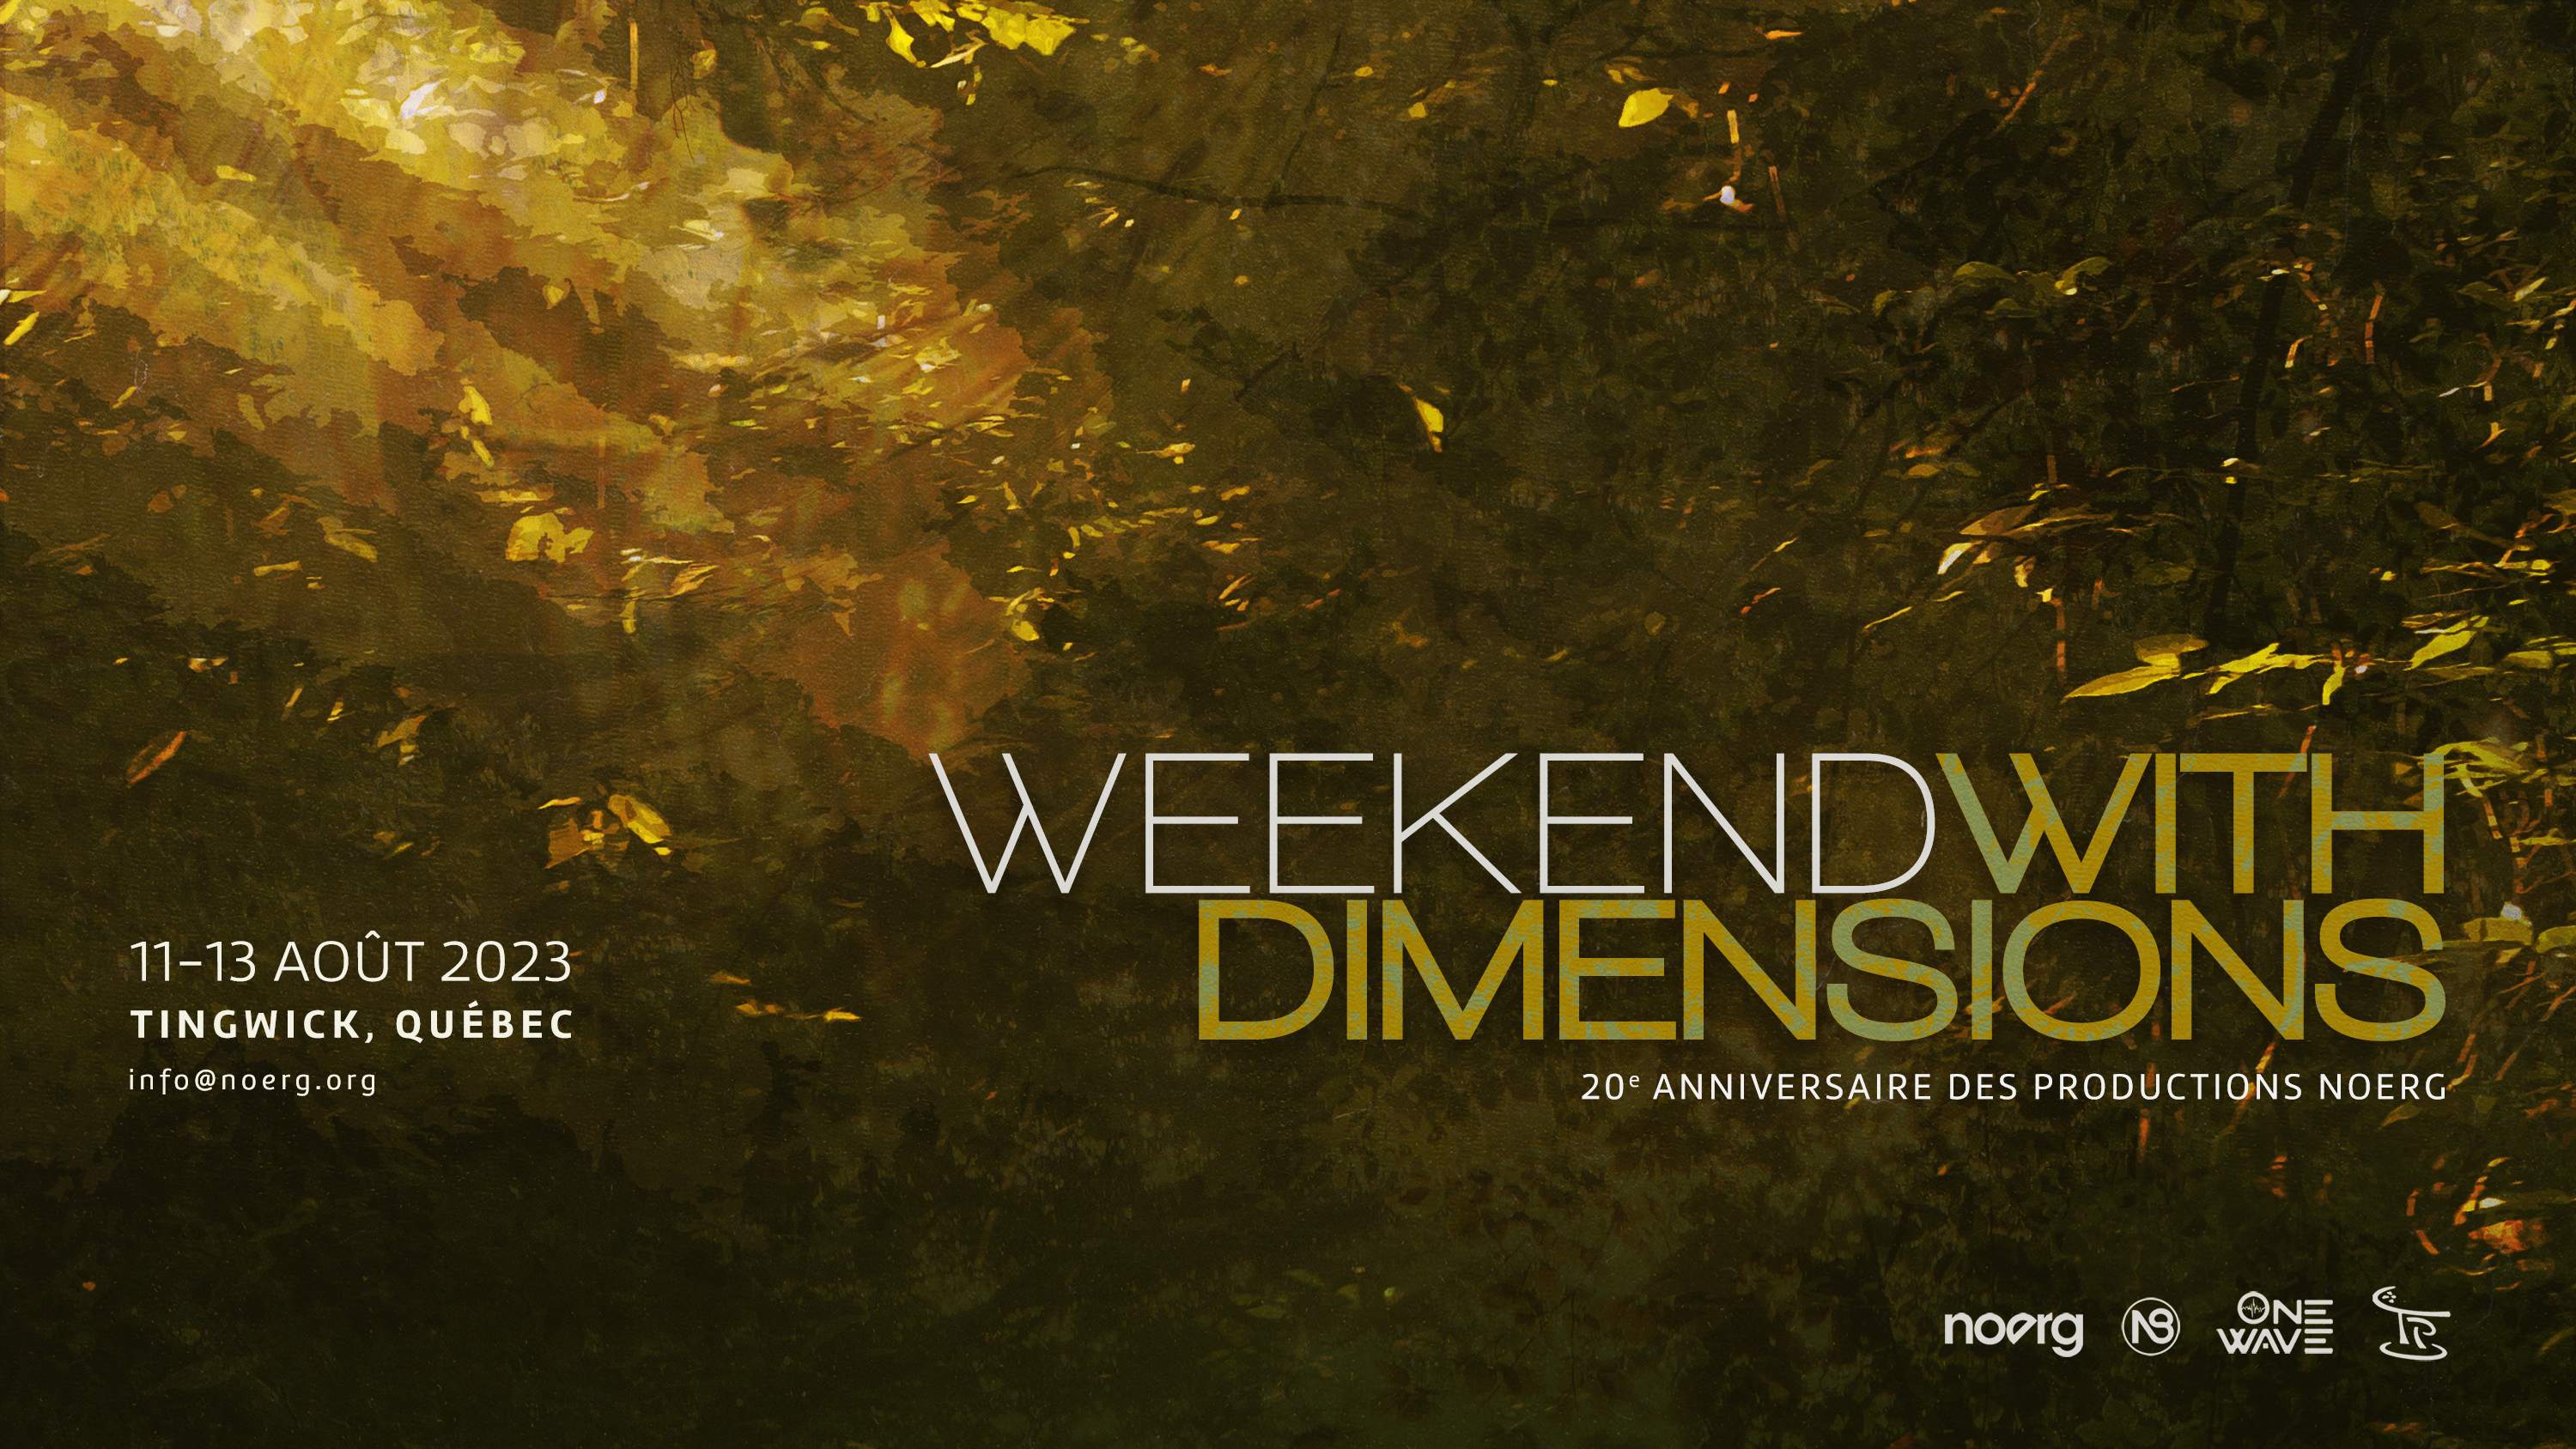 Weekend with Dimensions - フライヤー表